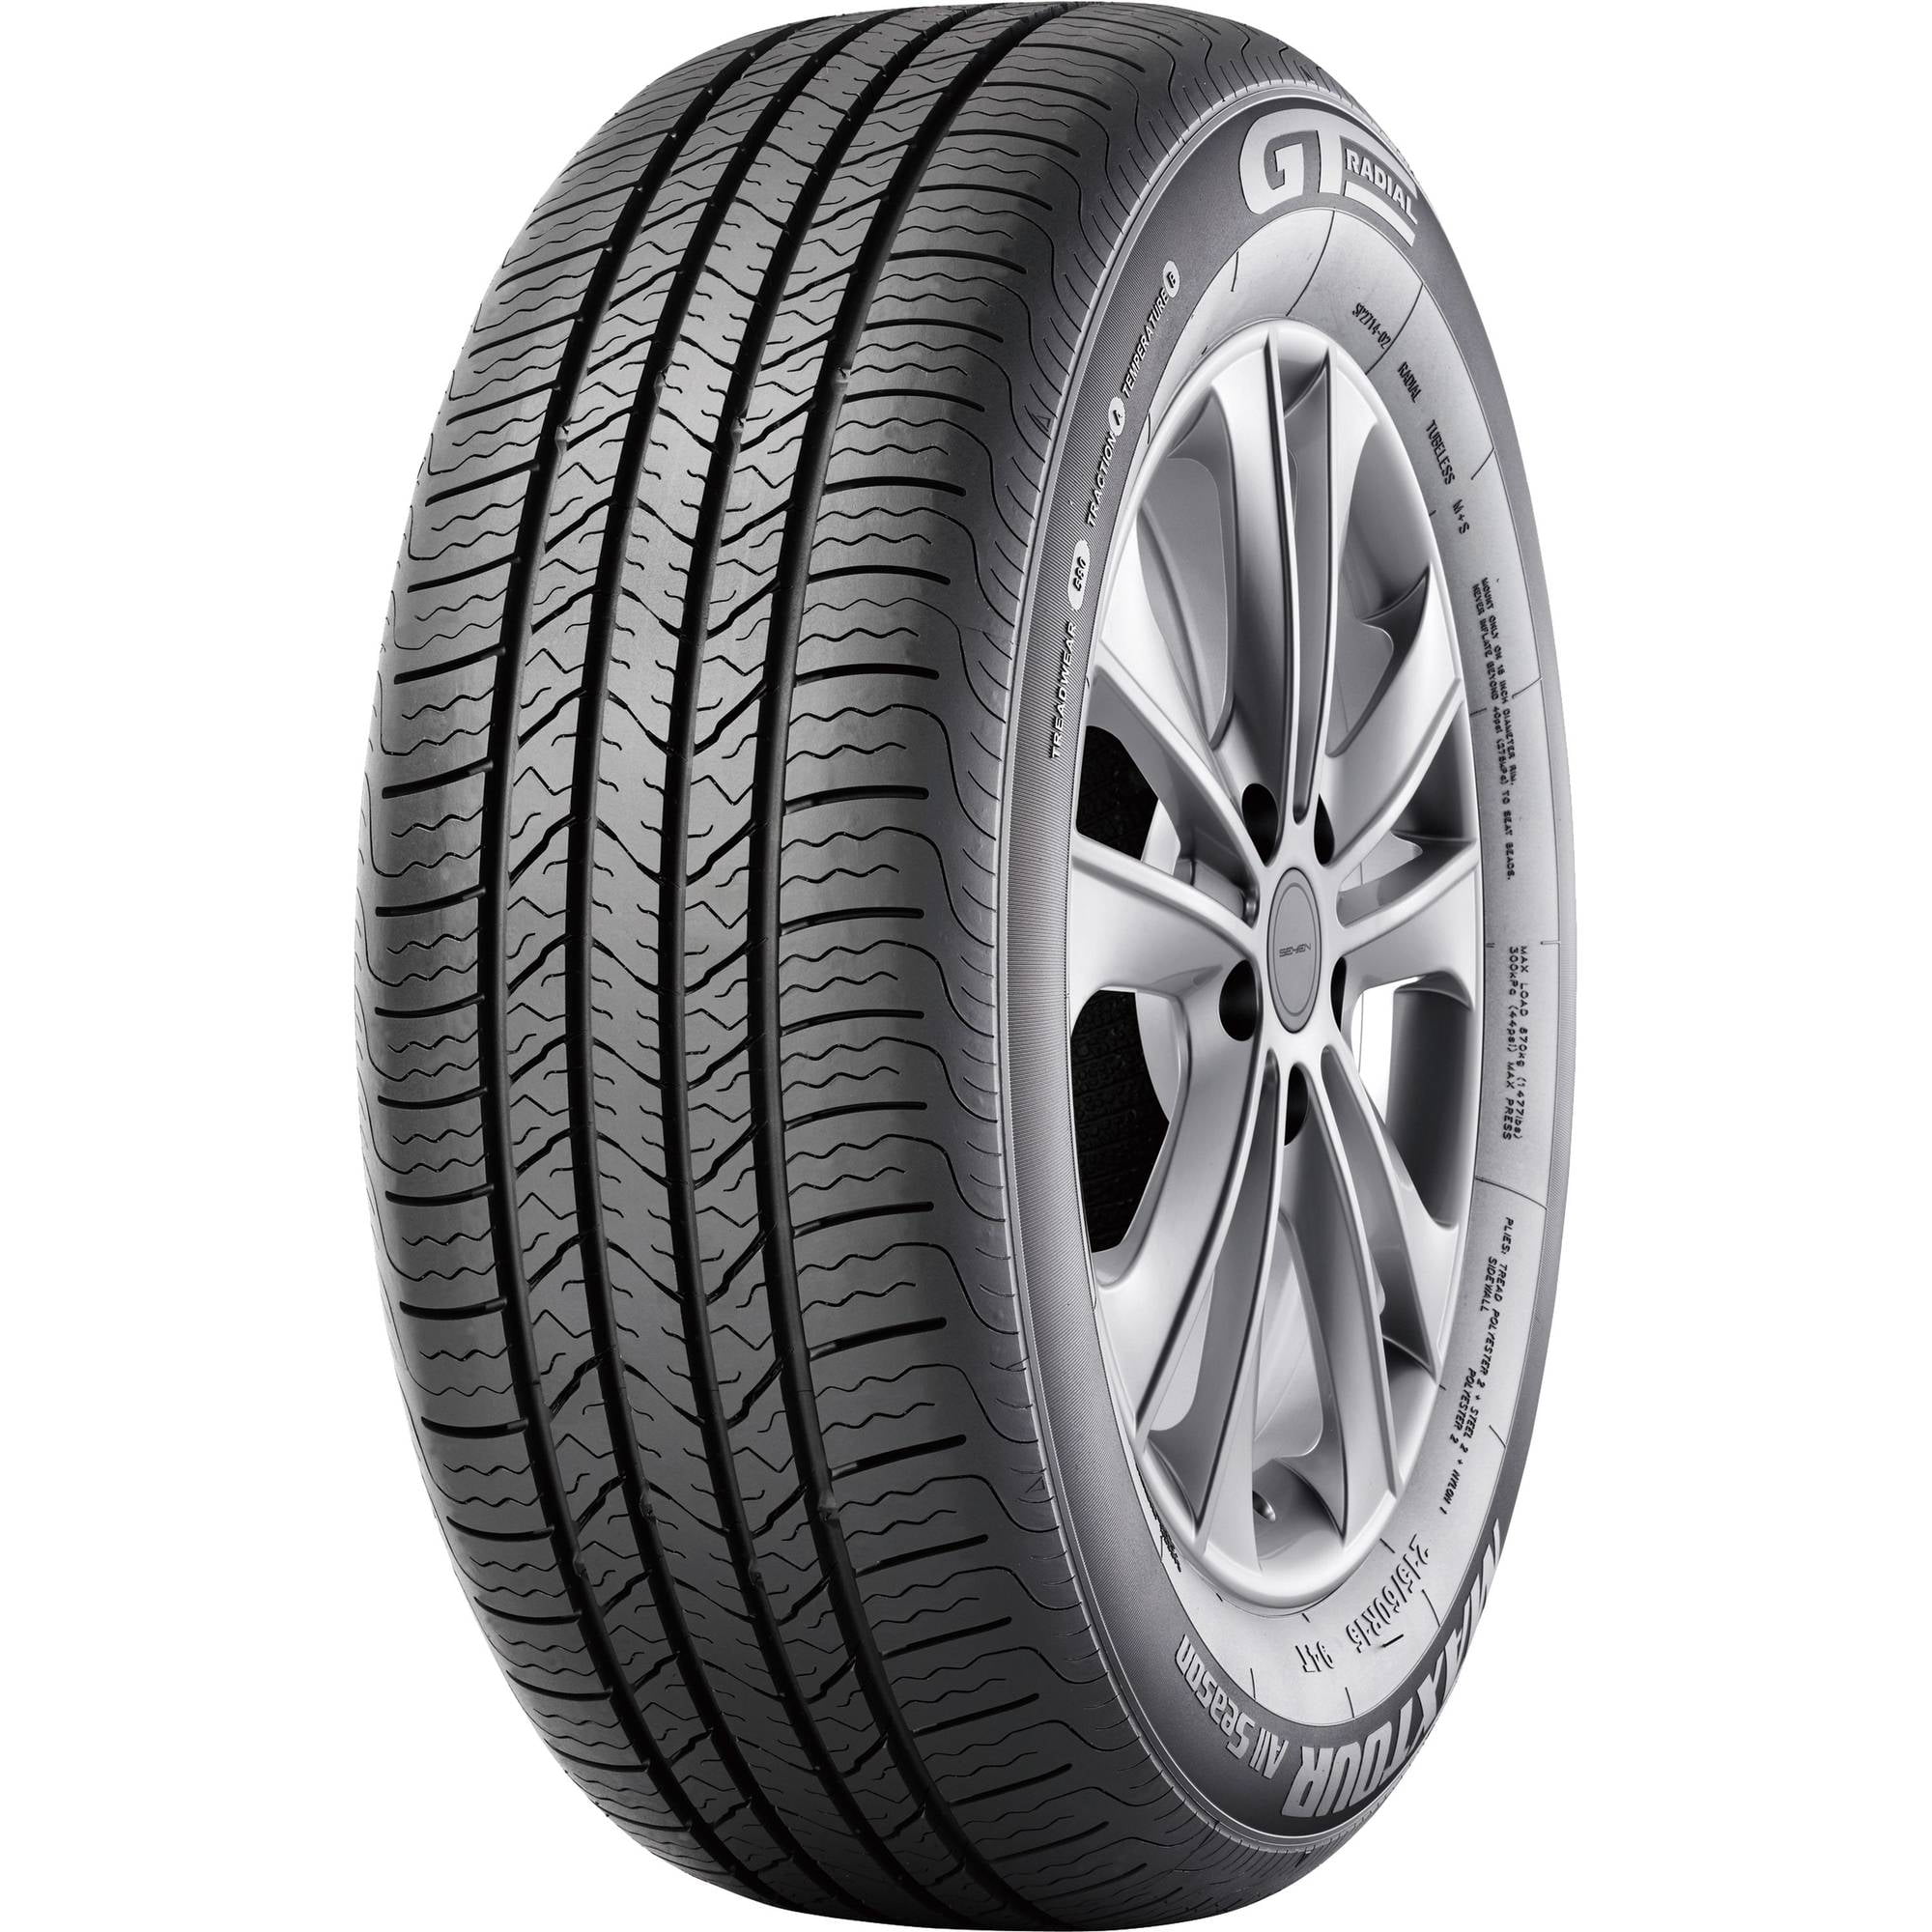 GT Radial SAVERO HT2 P245/60R18 Tires 104H BSW